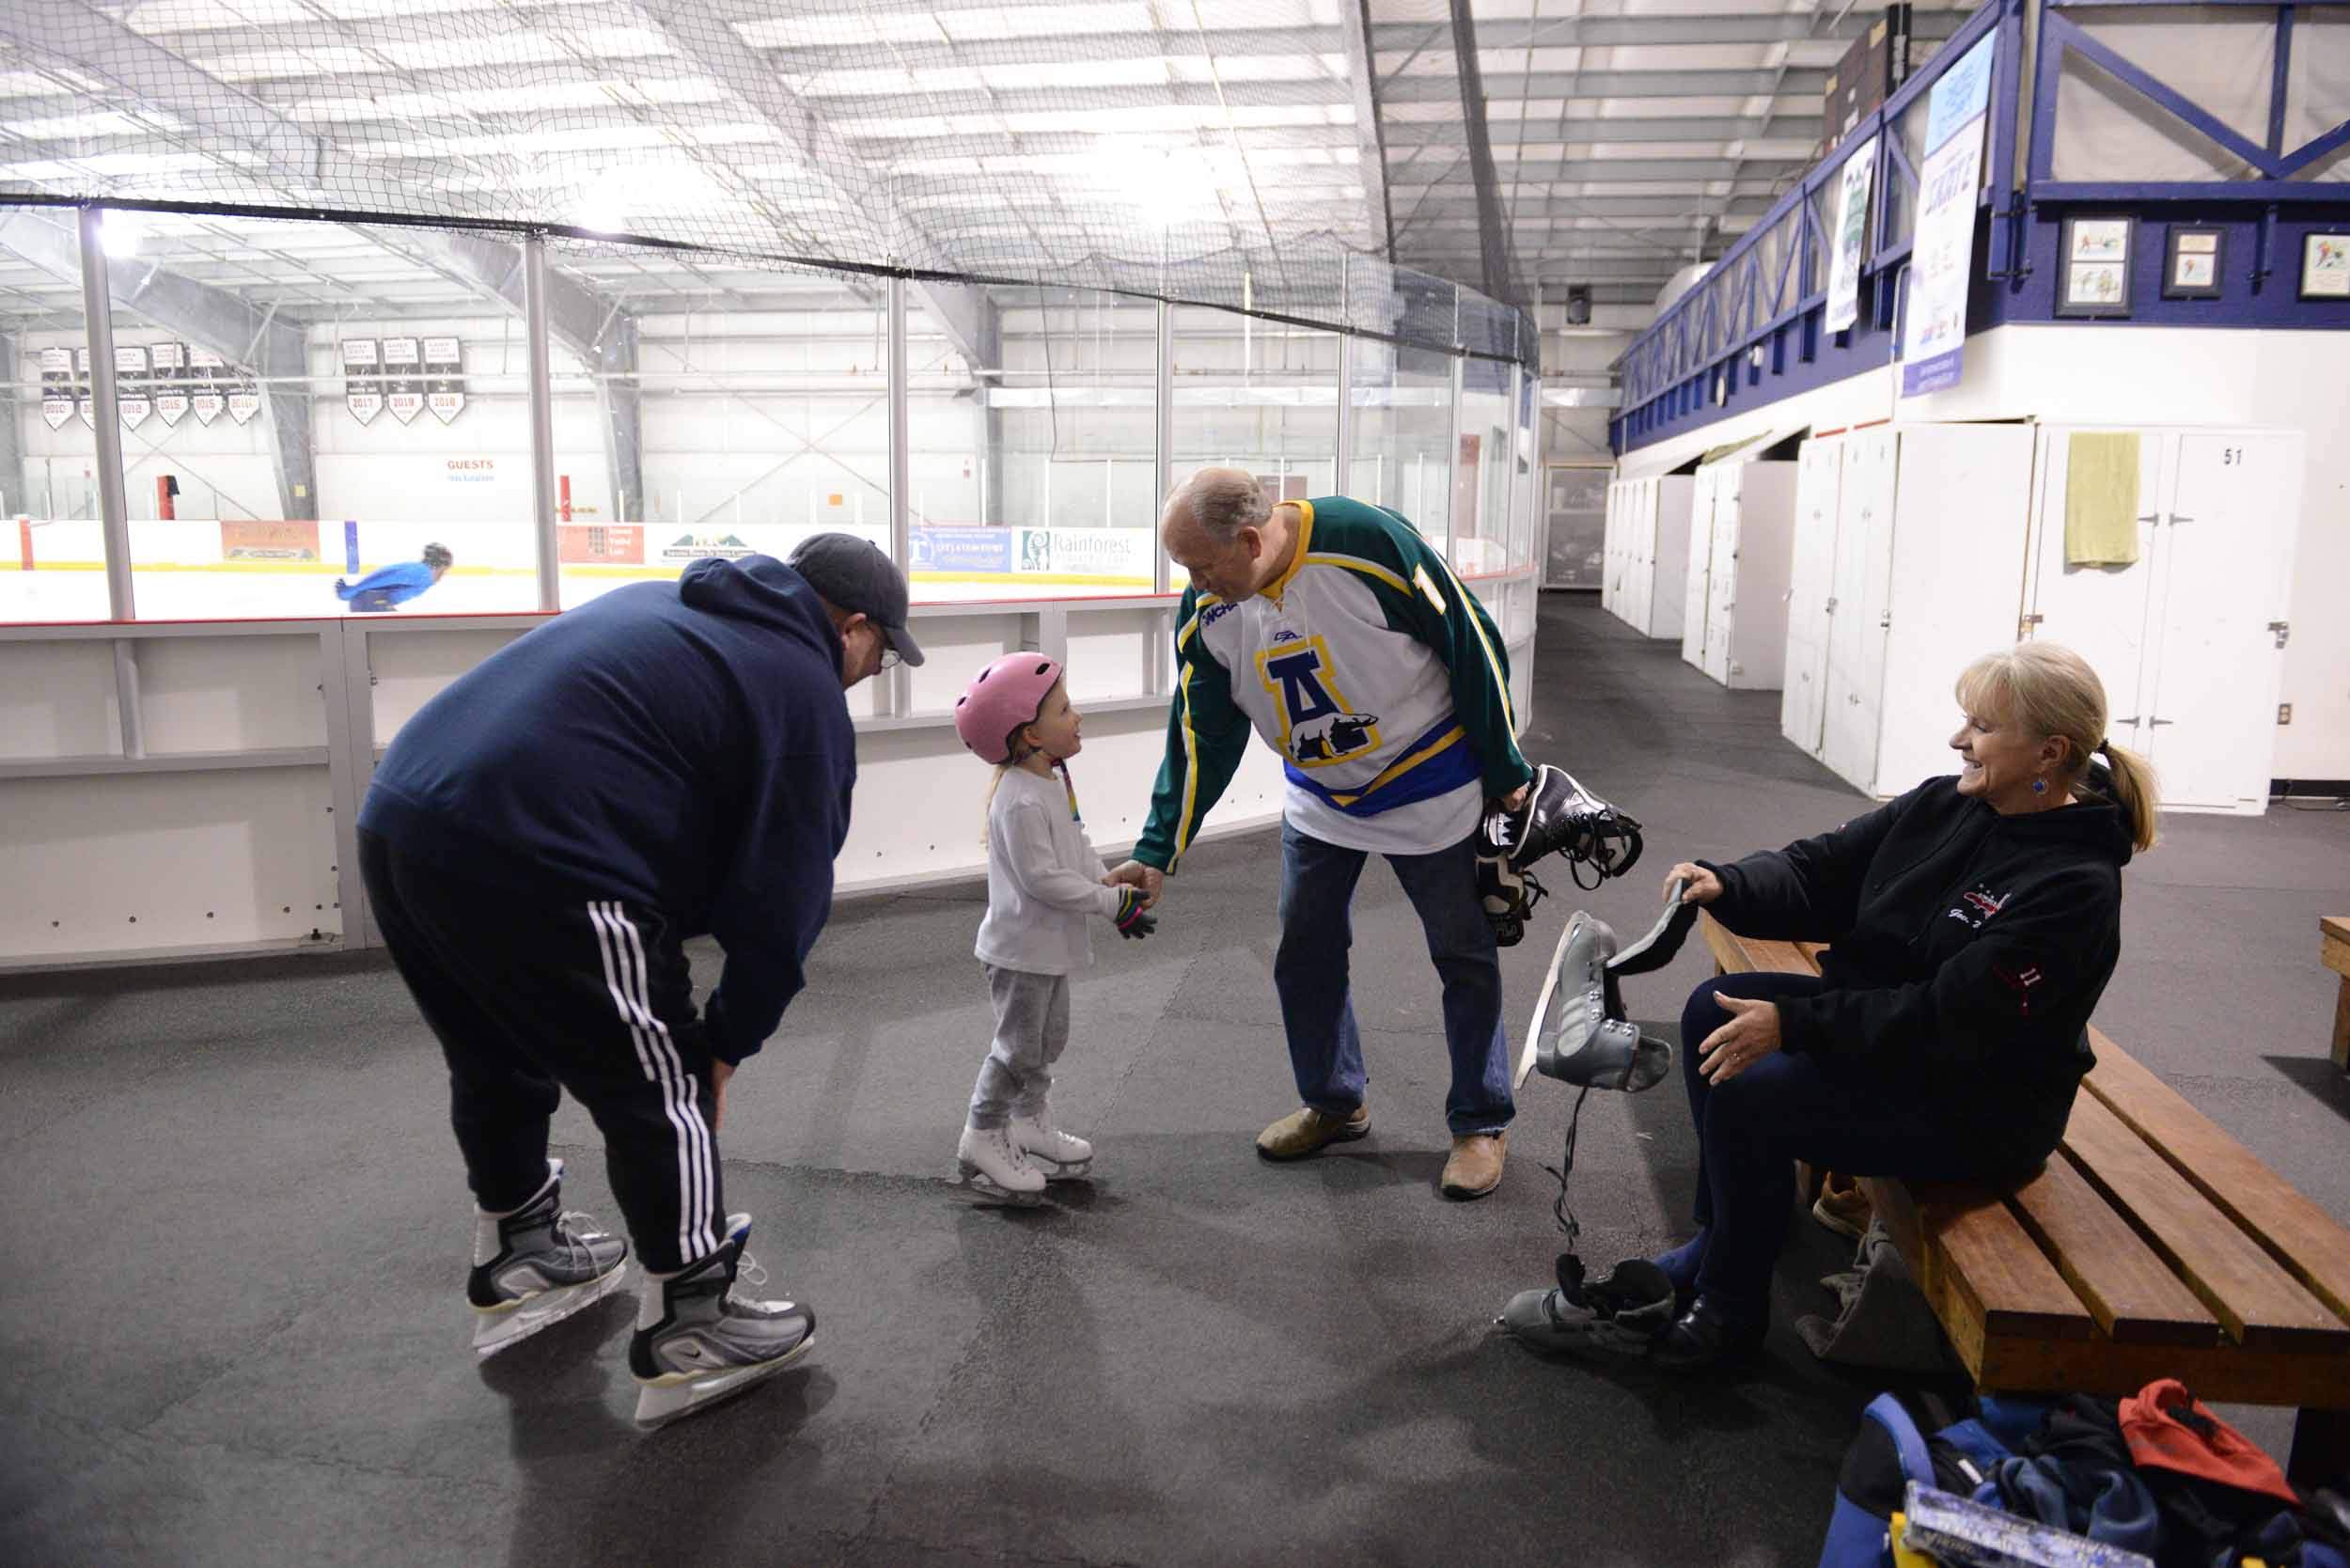  Governor Walker and First Lady Donna Walker greet a fellow skater at the Treadwell Ice Arena in Juneau, during the waning days of the administration. October 2018. 